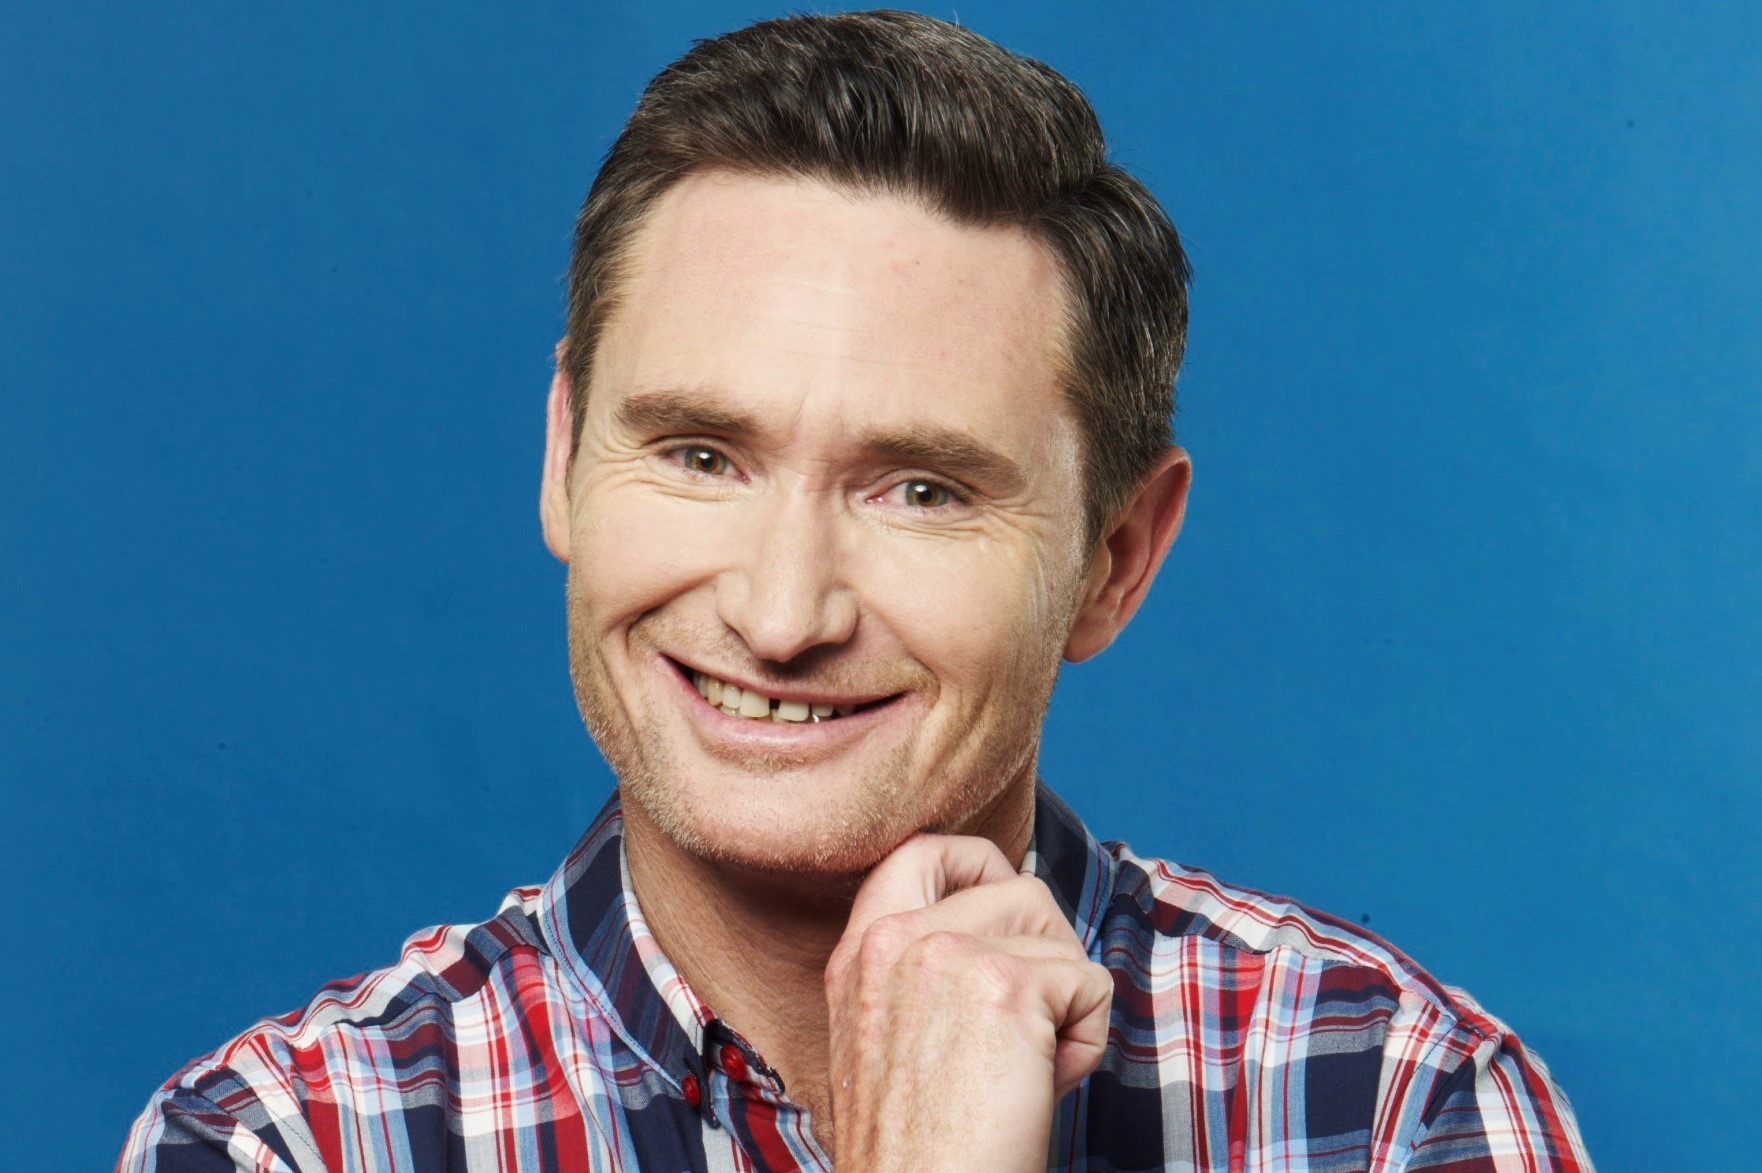 18 Intriguing Facts About Dave Hughes - Facts.net